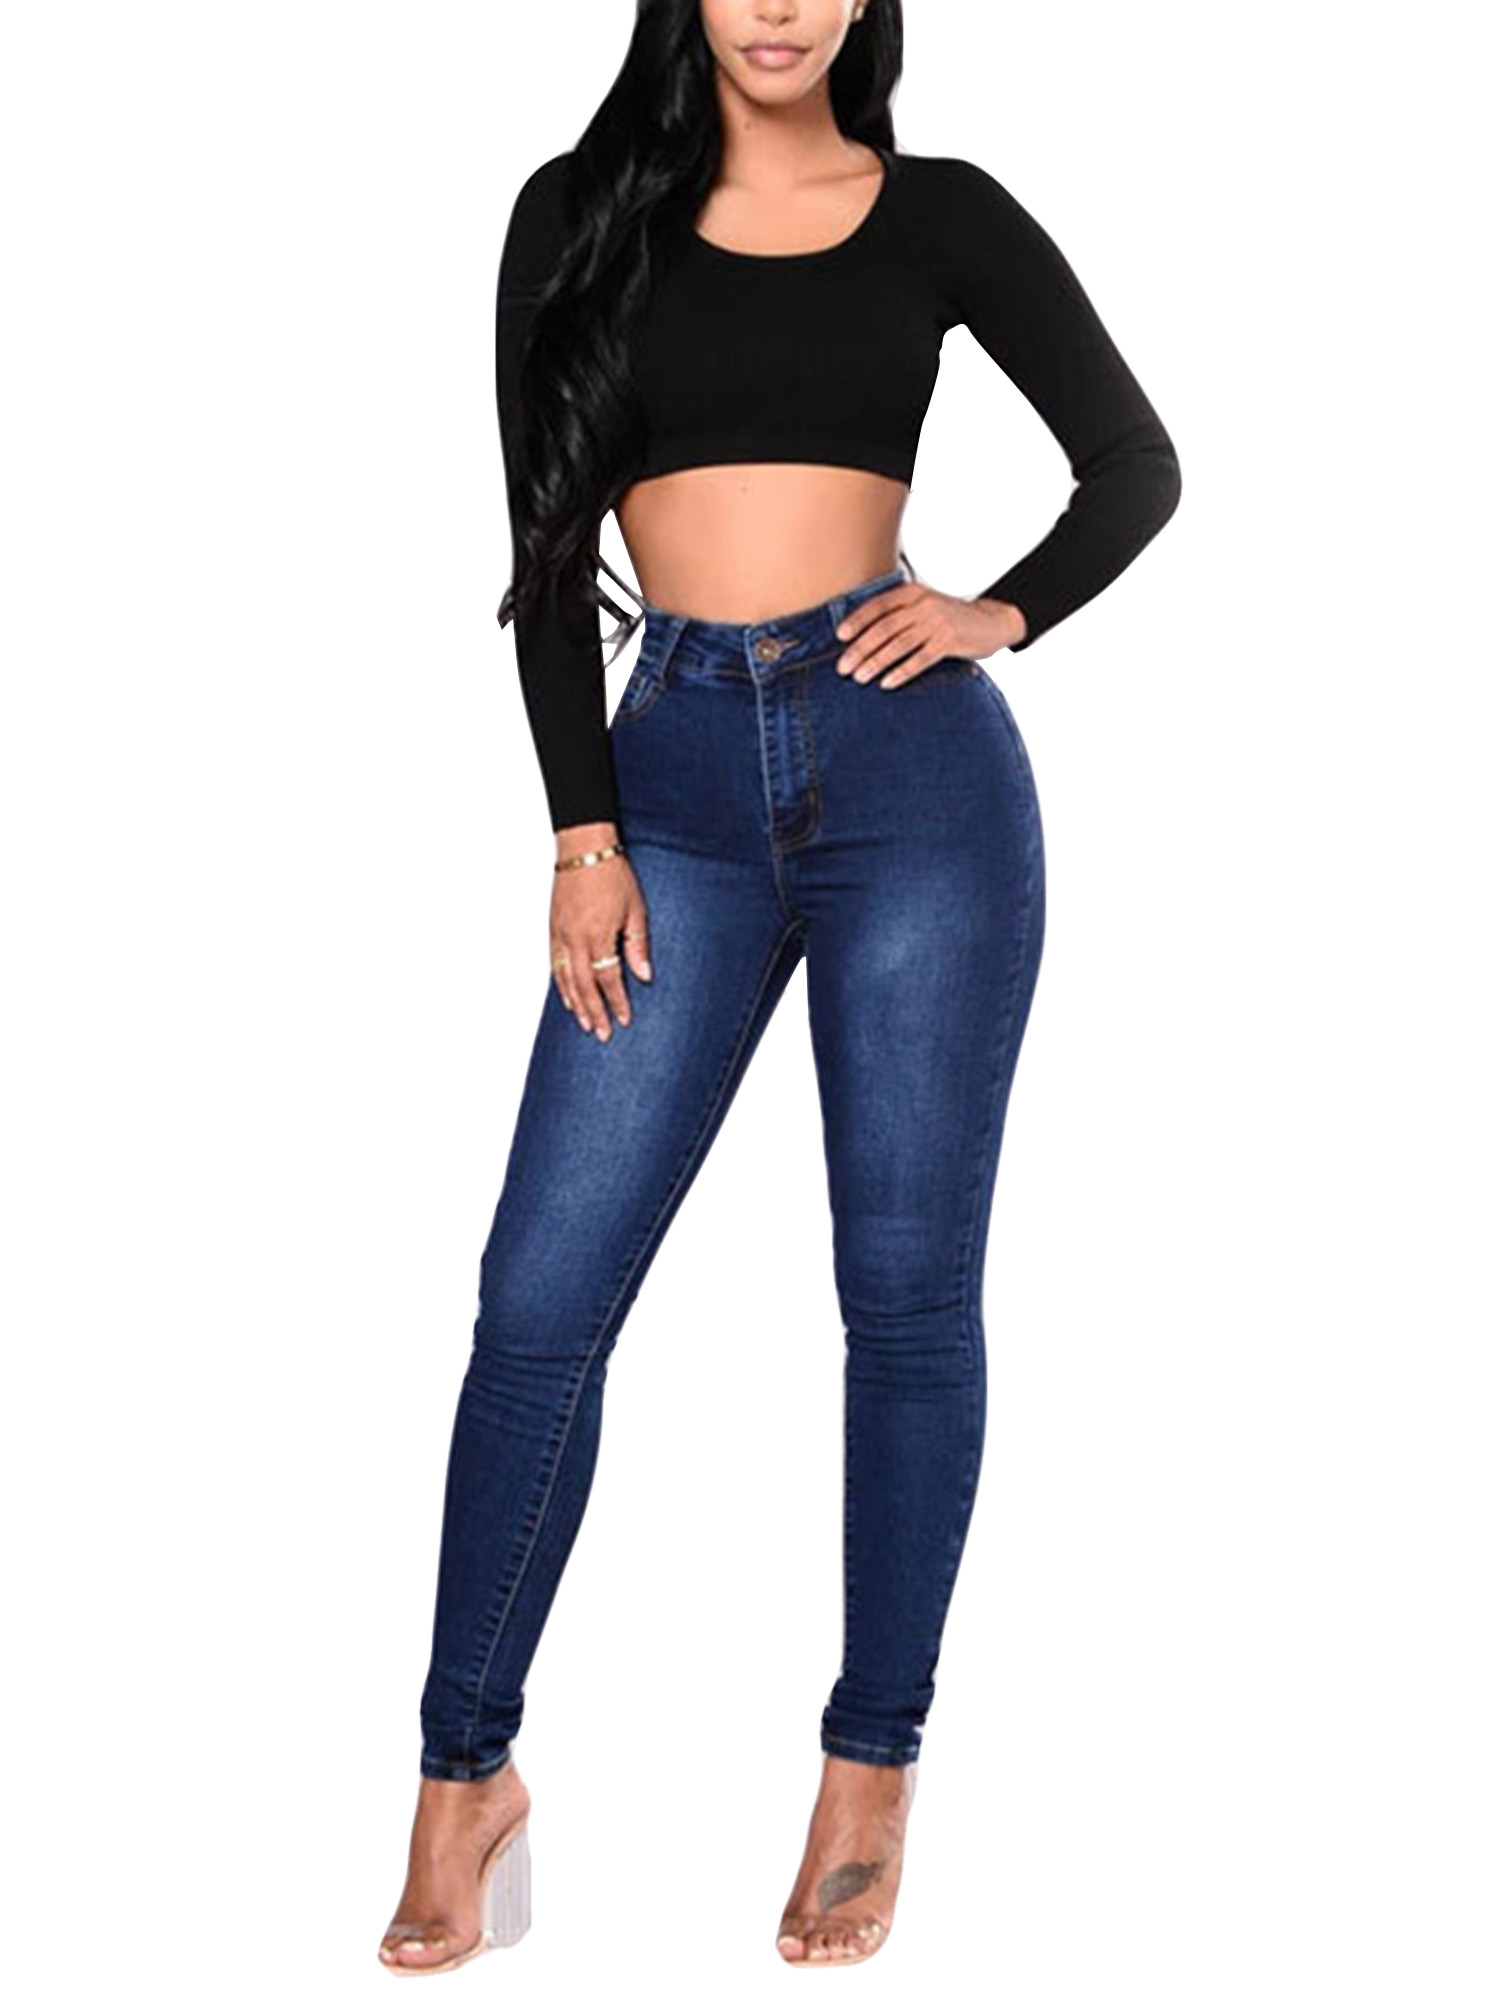 Women High Rise Distressed Solid Stretch Sexy Skinny Leg Denim Jeans Bodycon Jeggings Pencil Pants Trousers With Pockets - image 3 of 5